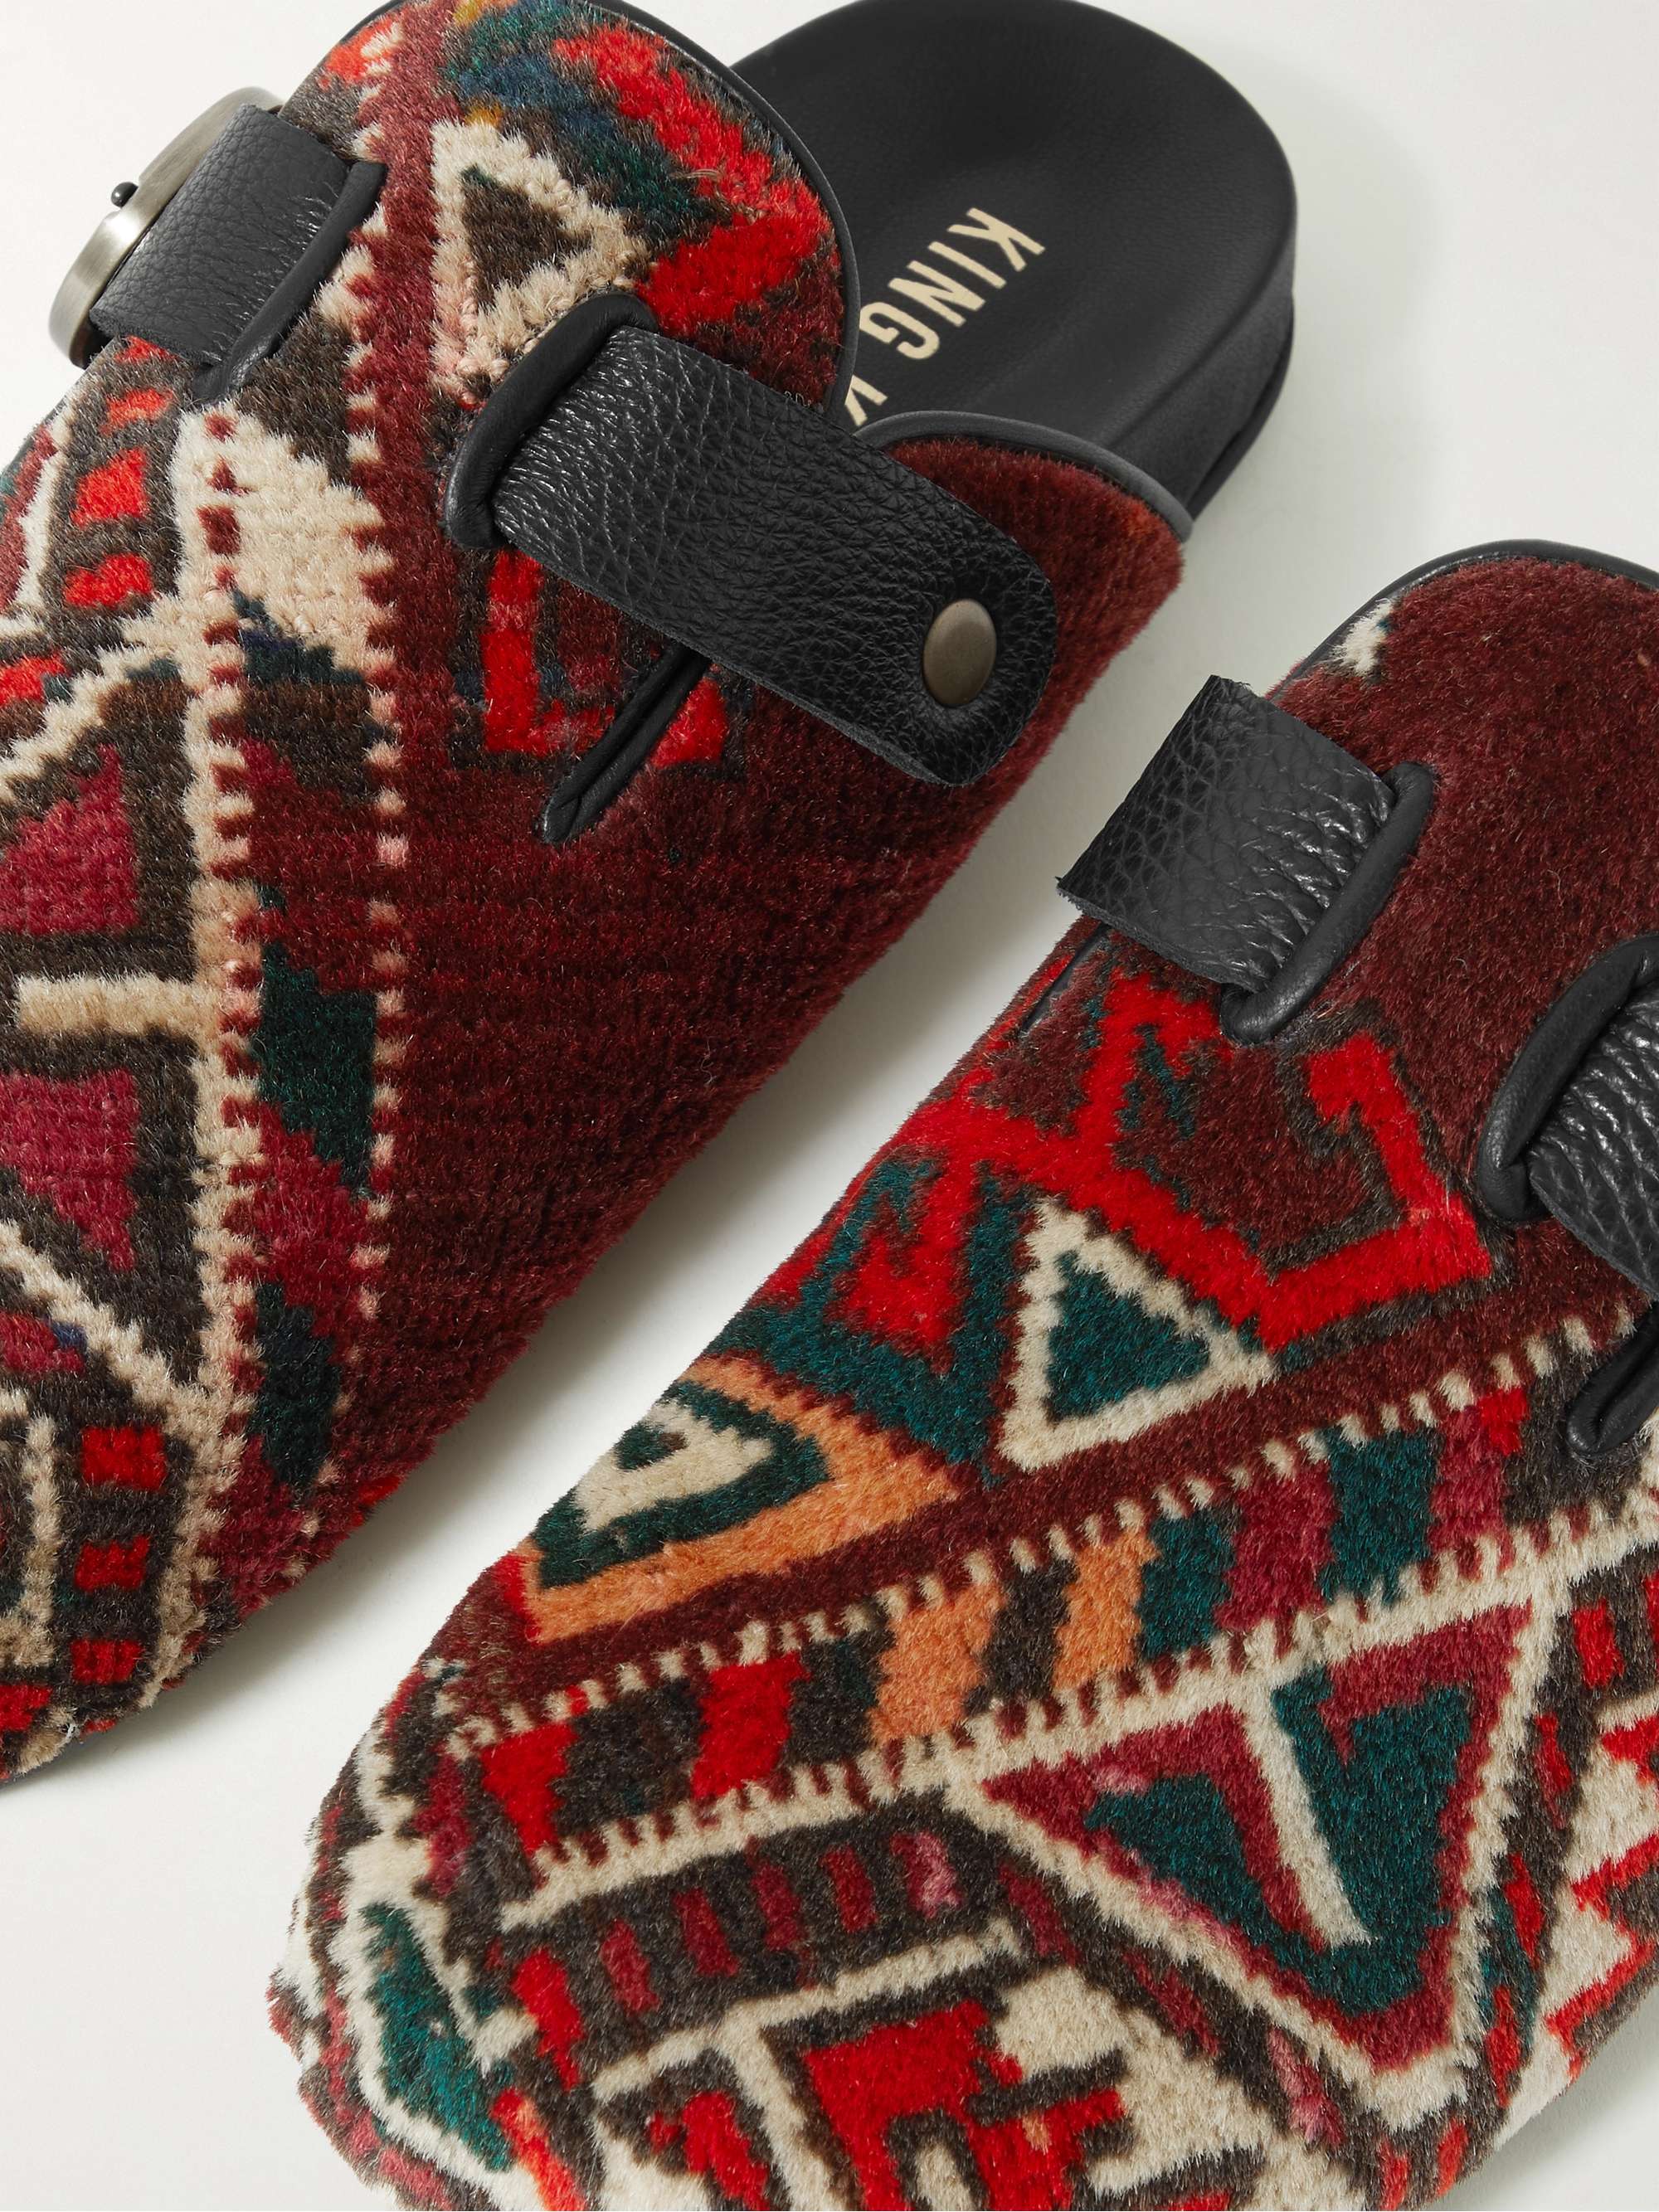 KING KENNEDY RUGS Upcycled Leather-Trimmed Wool Mules